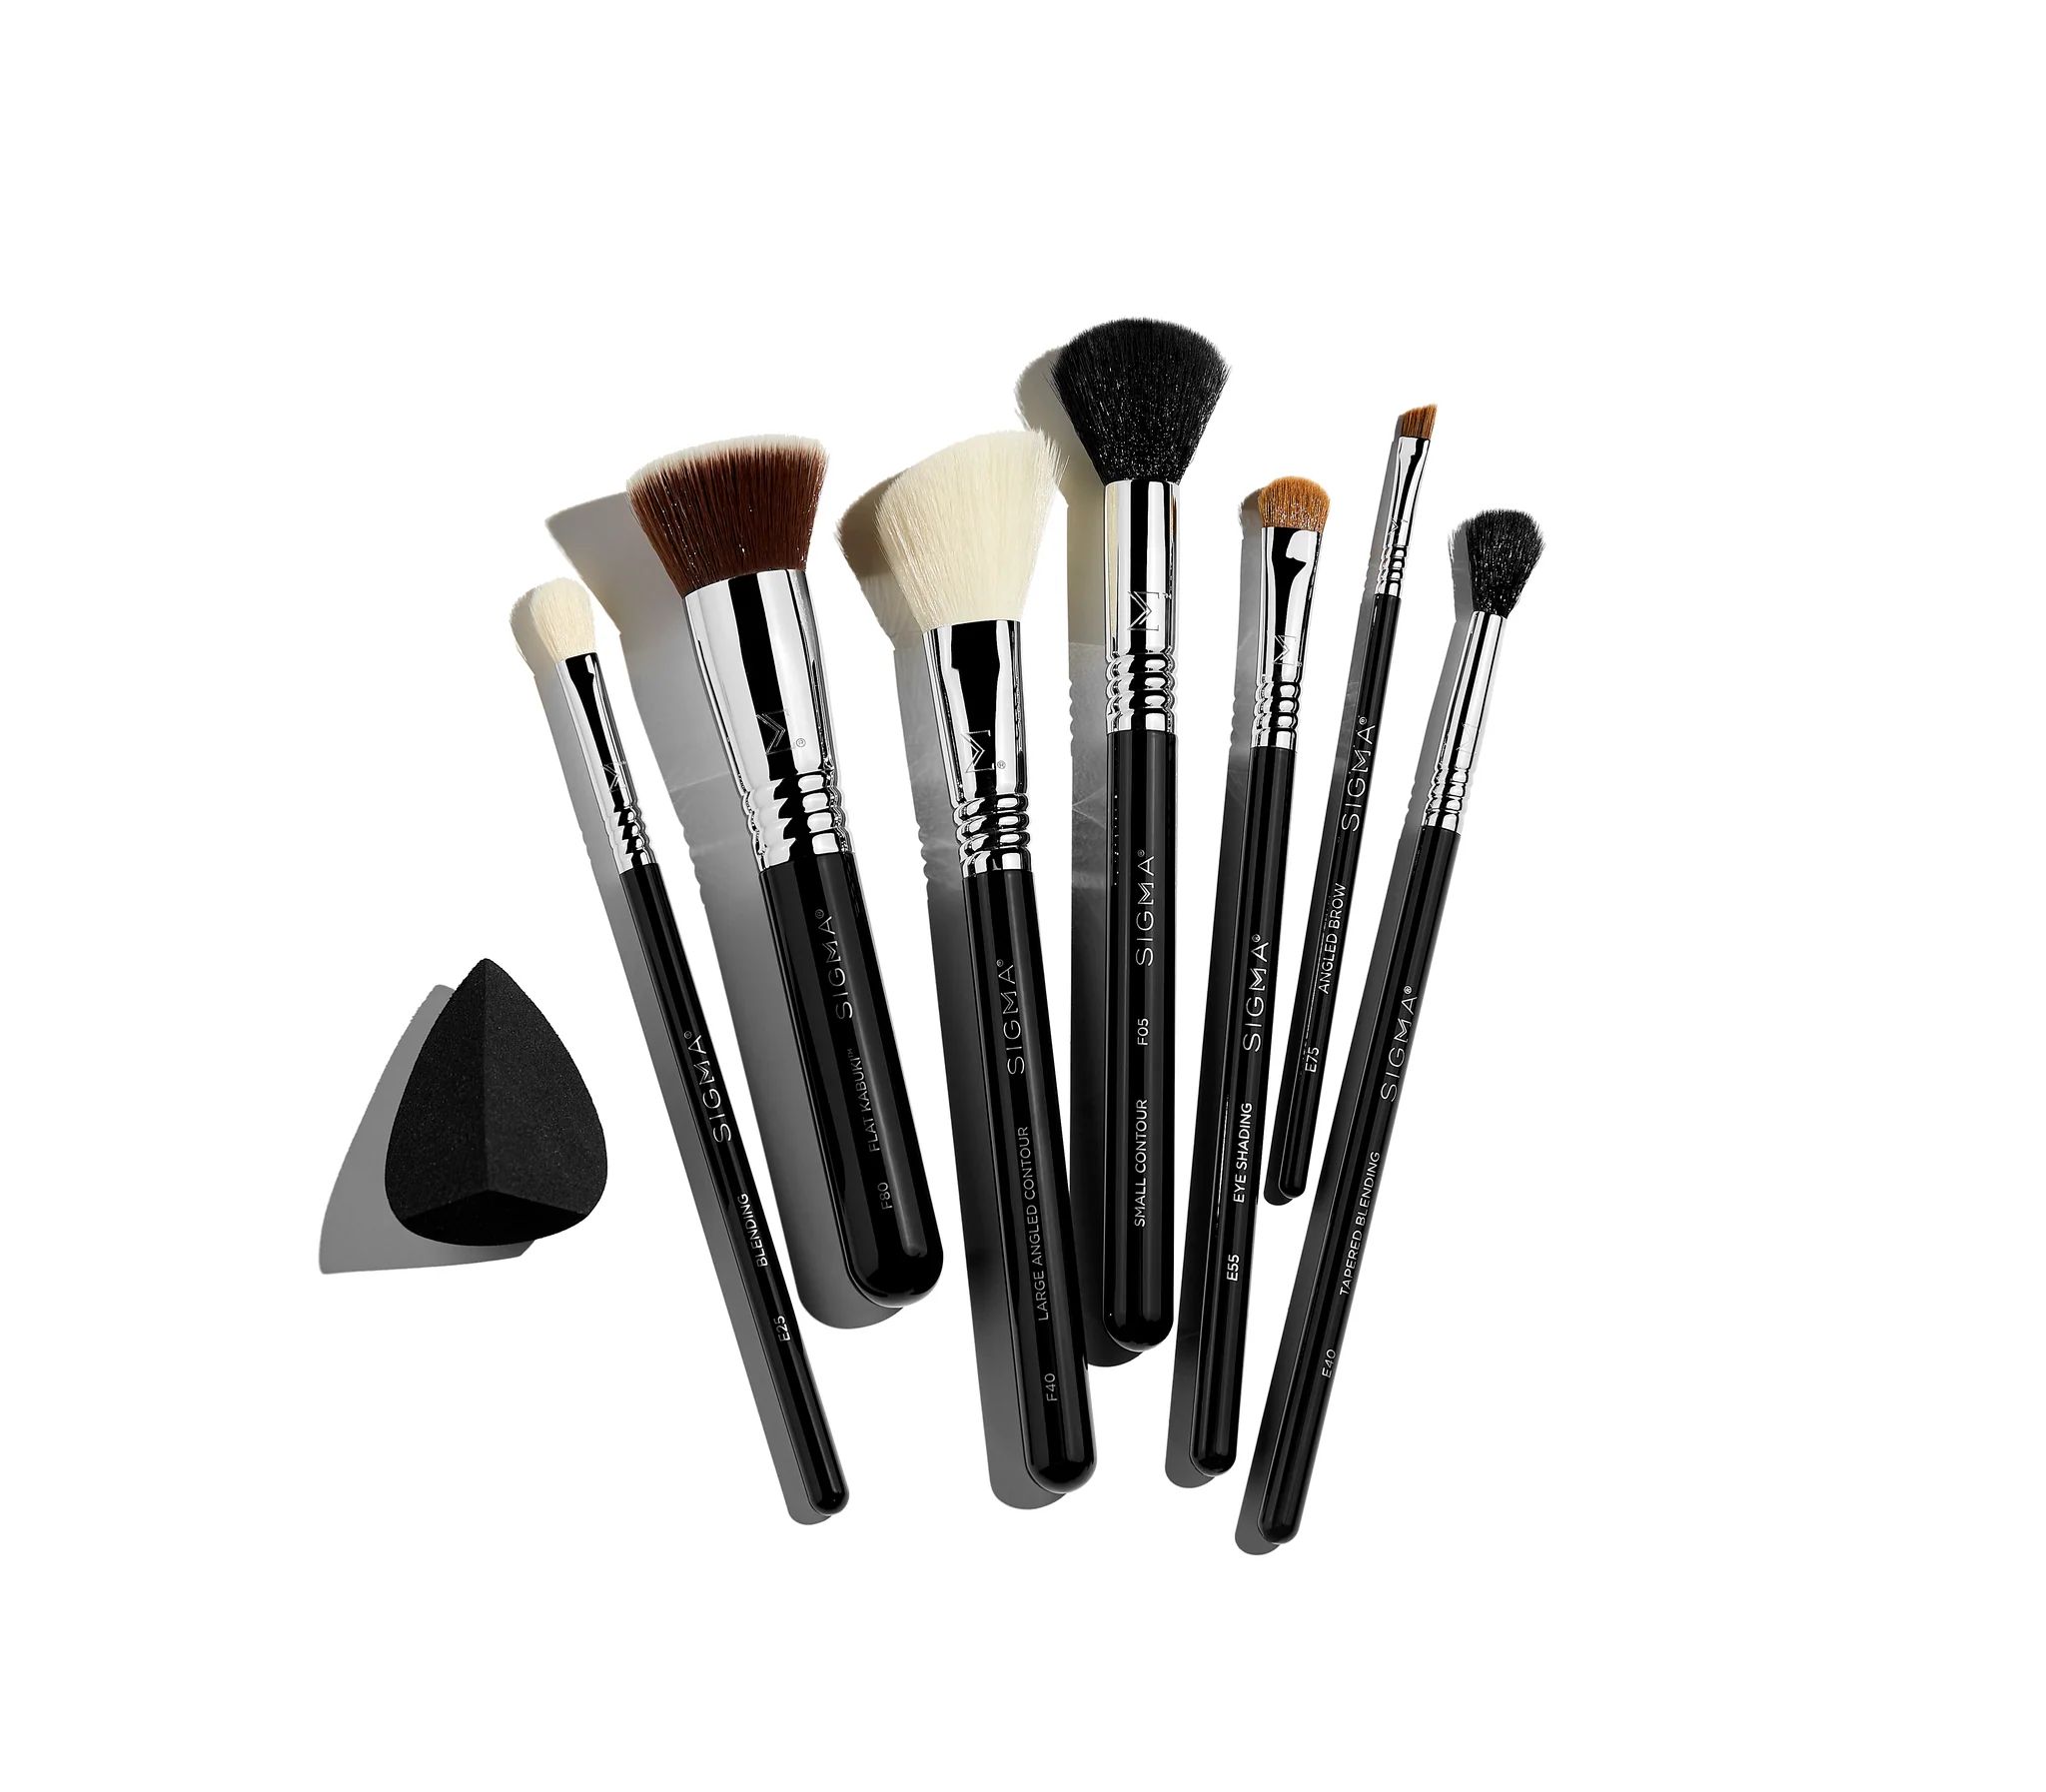 BEST IN THE BUSINESS BRUSH SET | Sigma Beauty